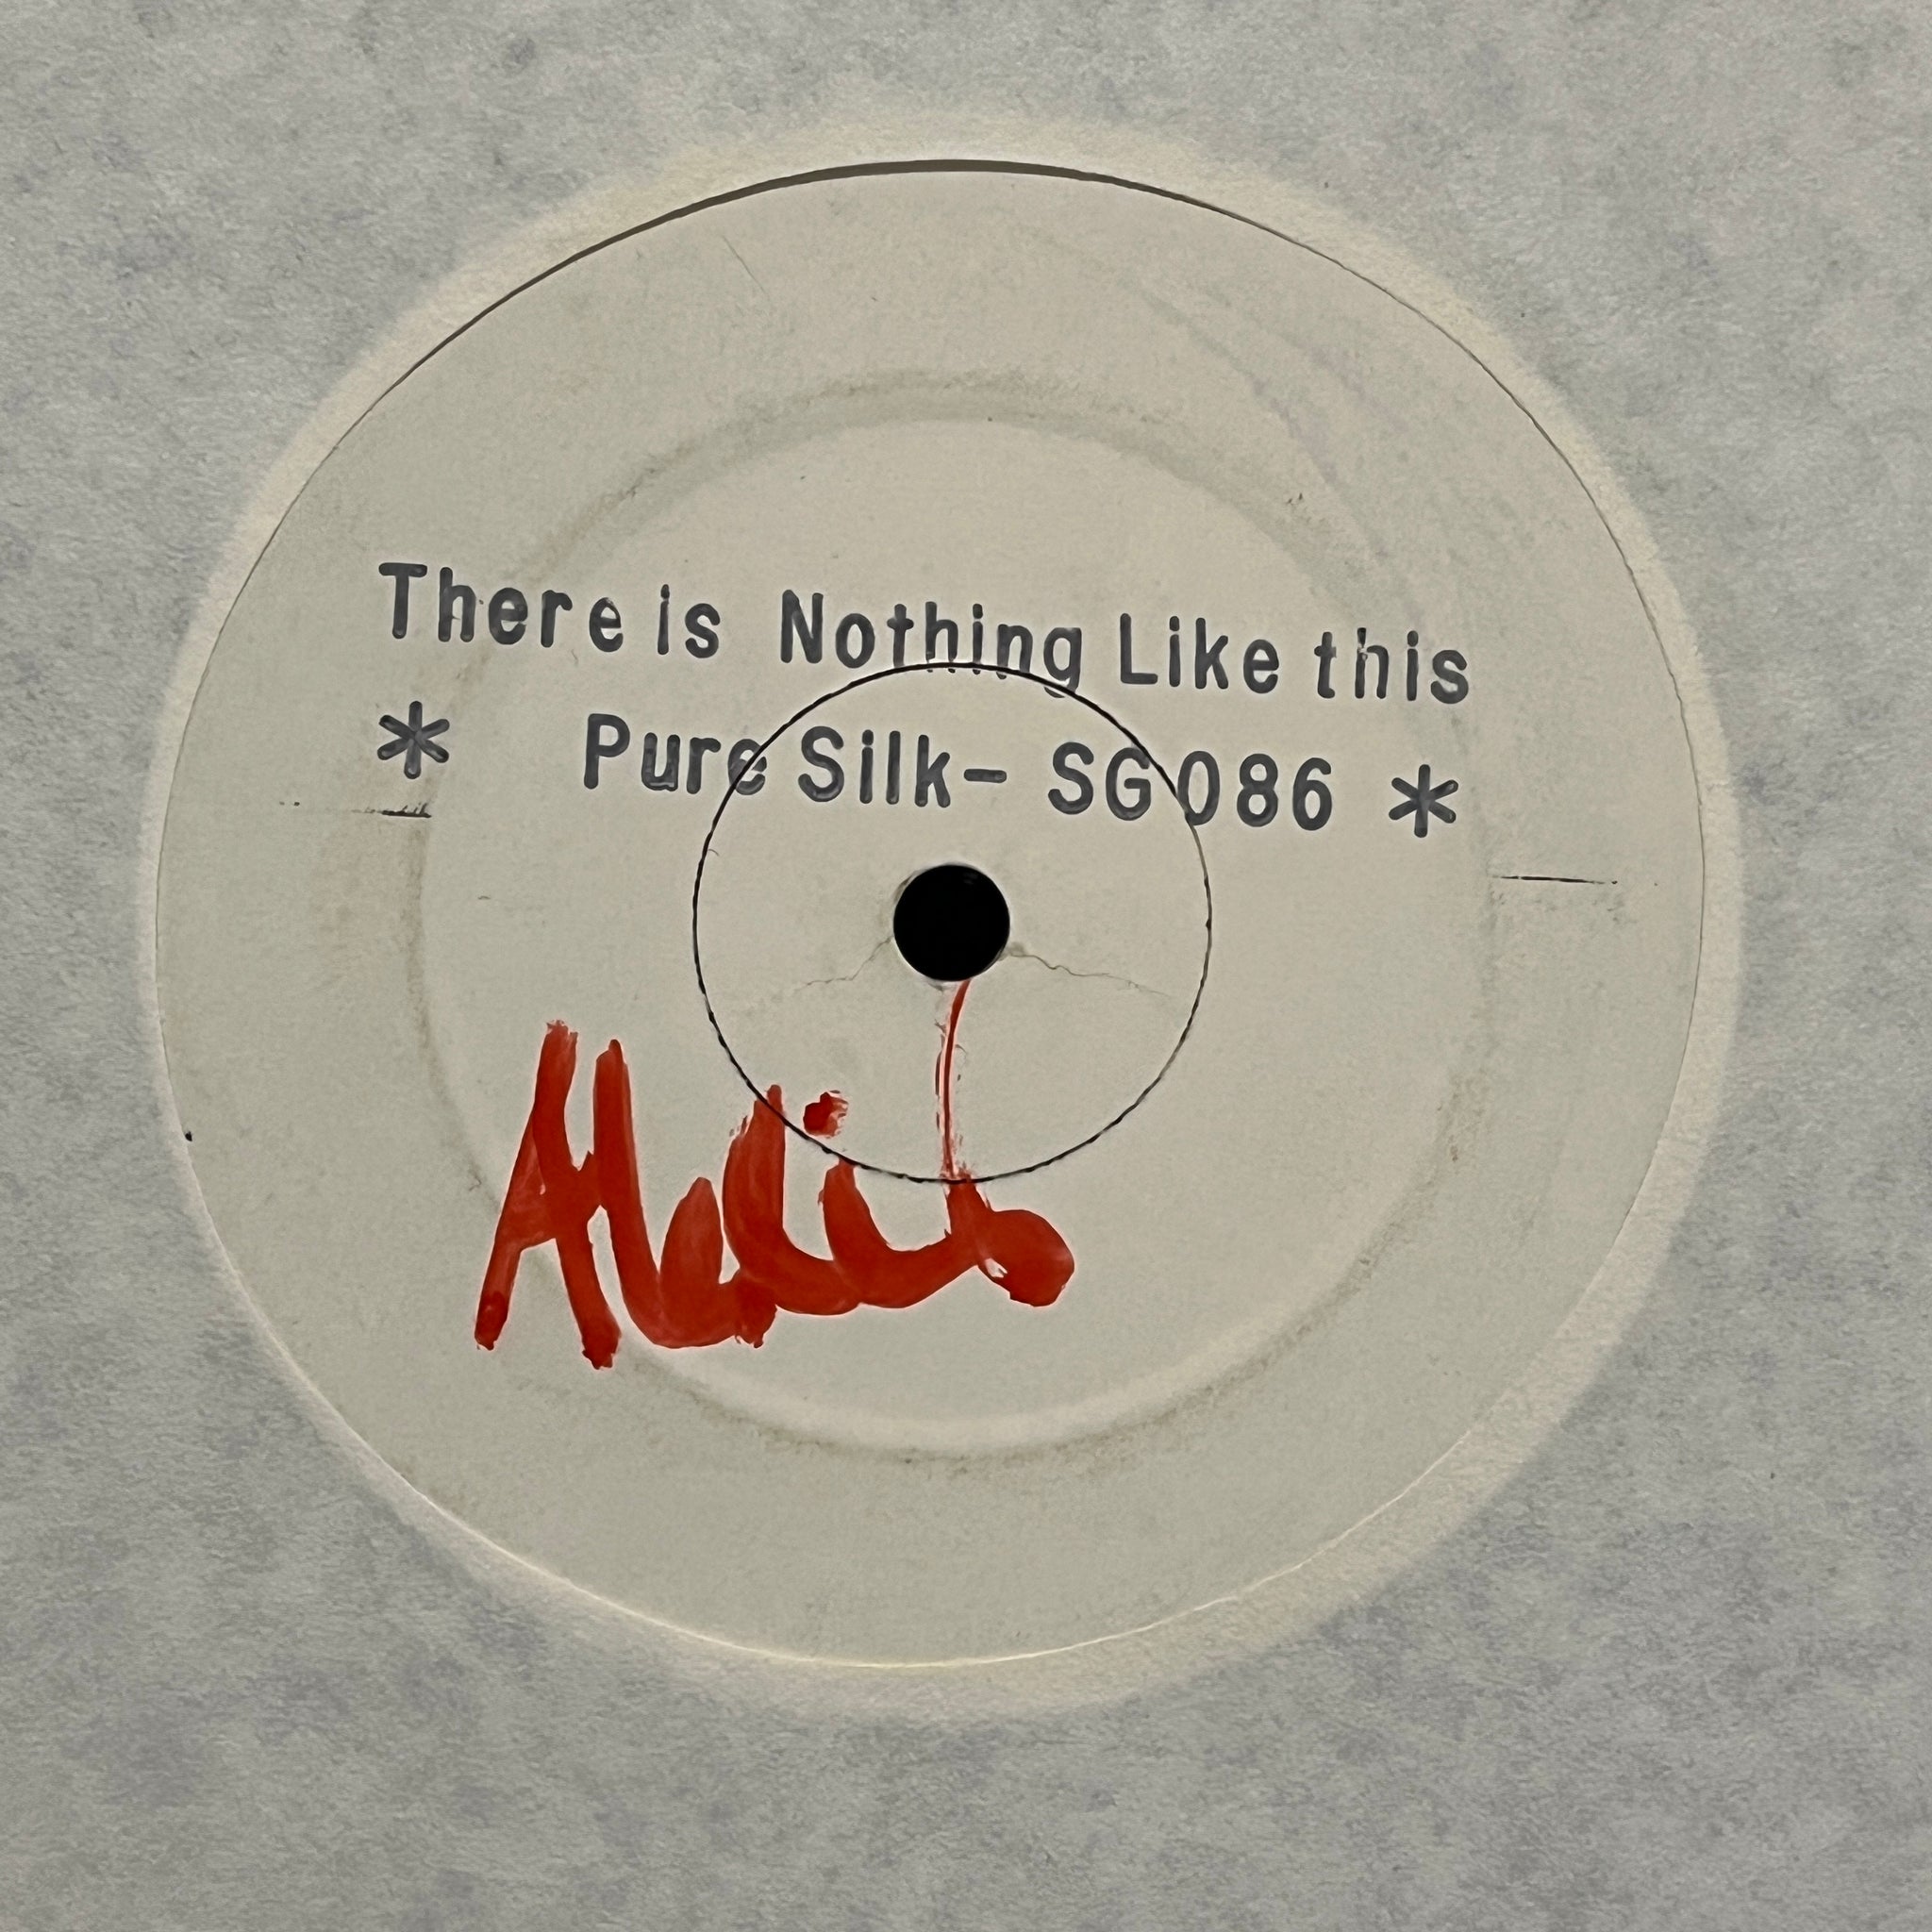 Pure Silk Featuring Outer Limits – There's Nothing Like This